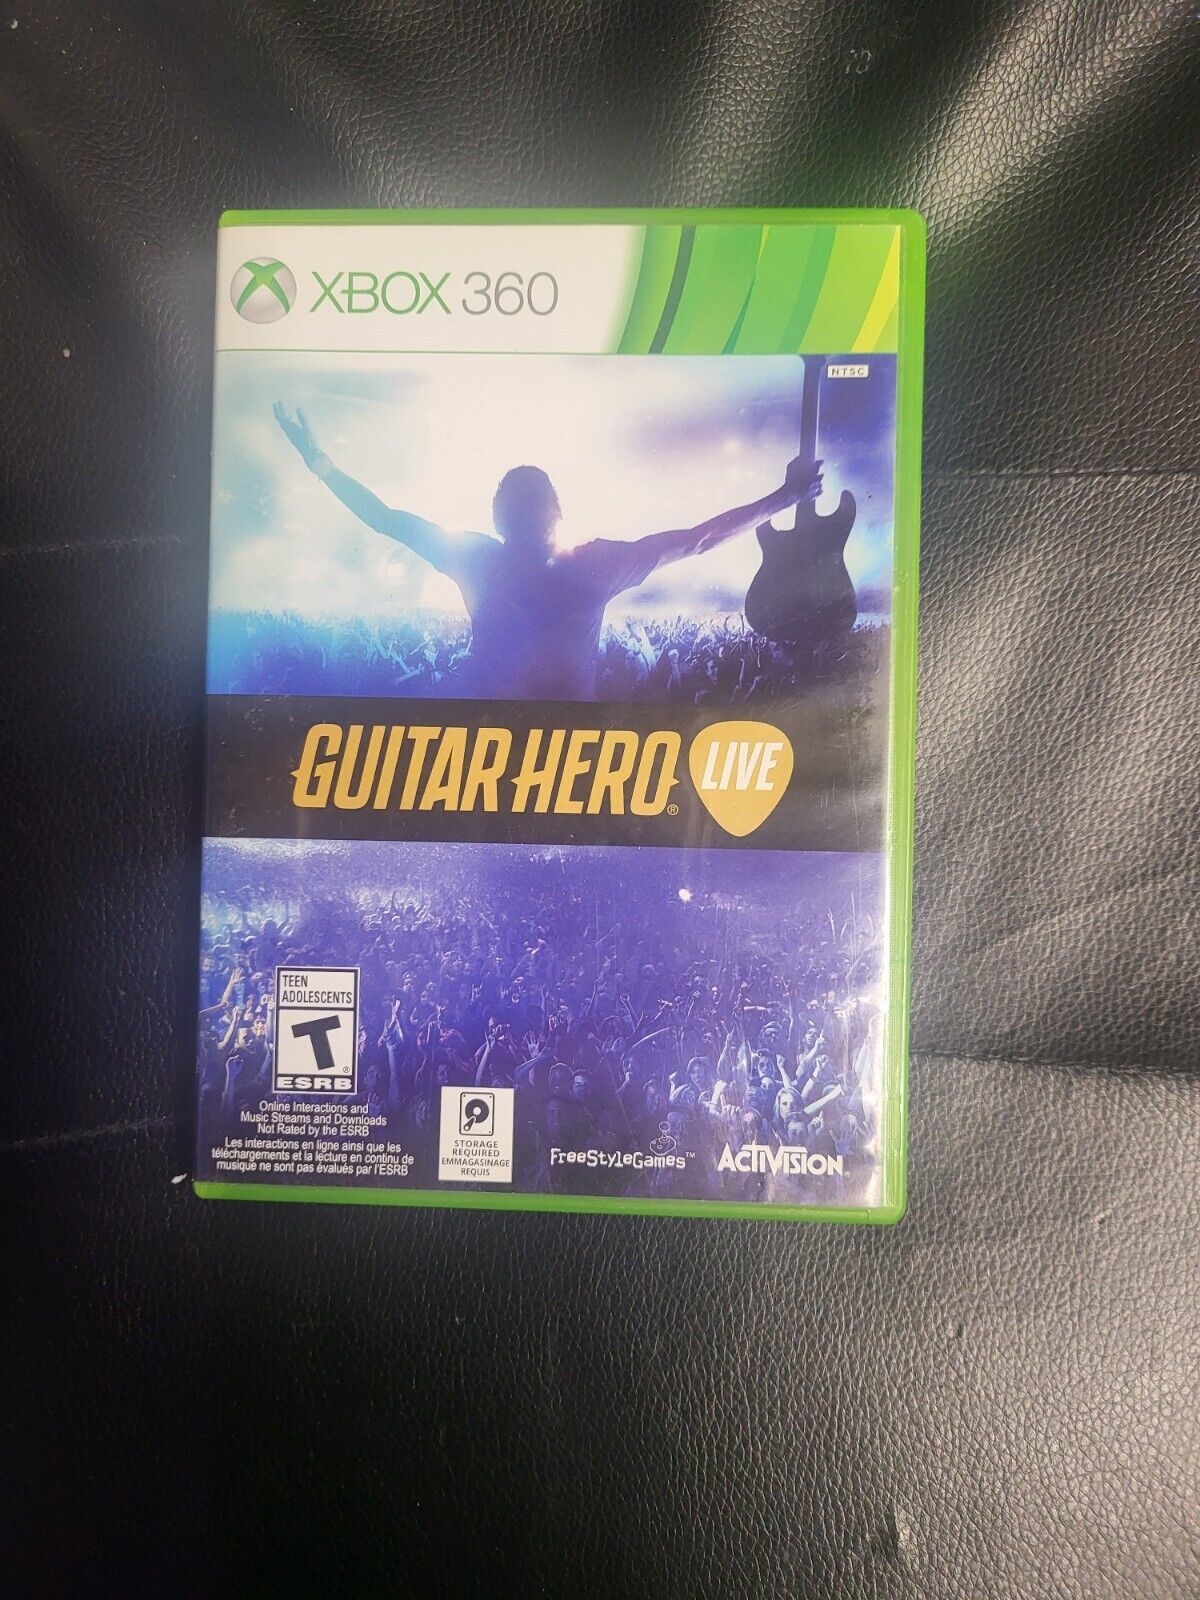 Primary image for Guitar Hero Live (Xbox 360, 2015) 2 DISC   IN CASE + ARTWORK / NO MANUAL